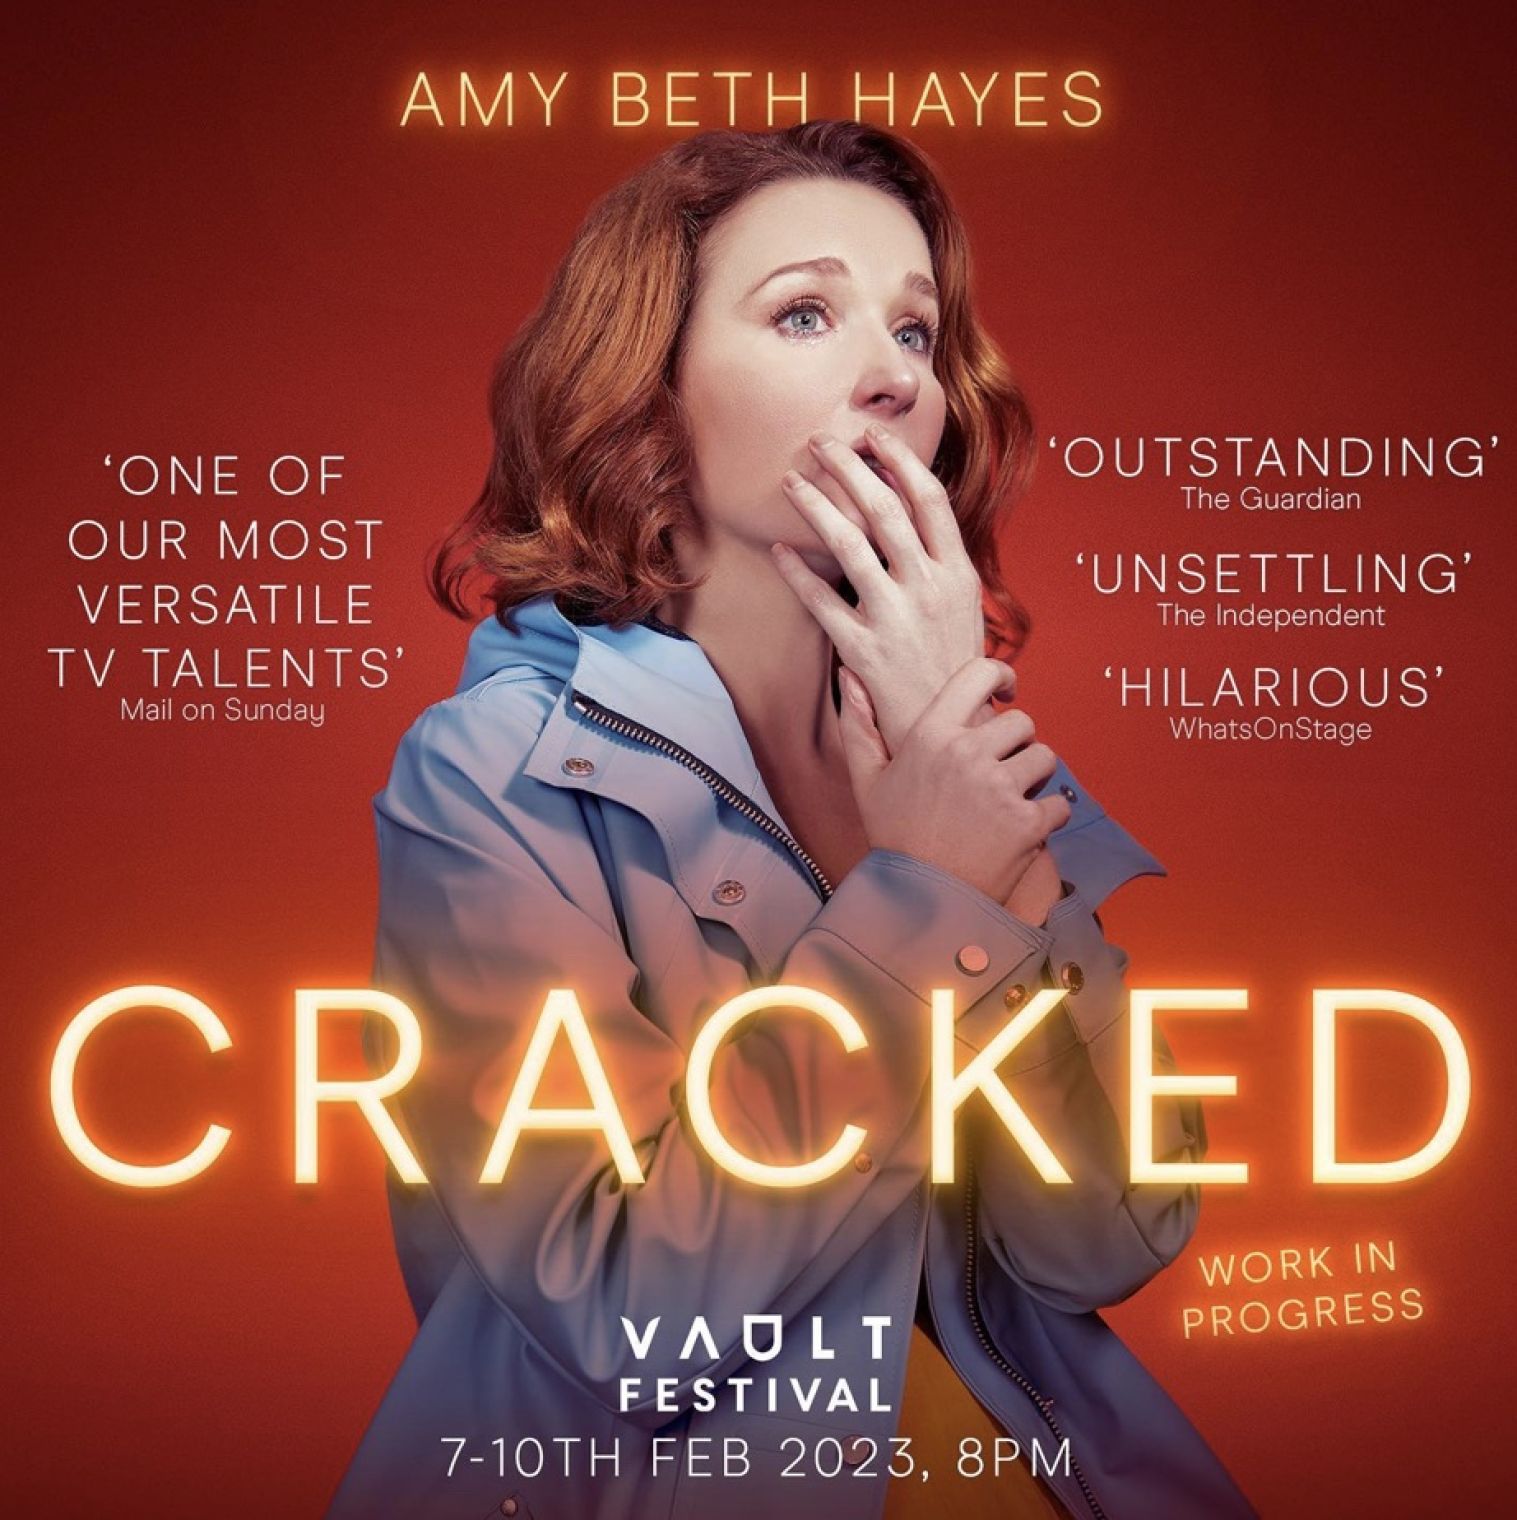 Amy Beth Hayes will be performing her debut play ‘Cracked’ at next year’s Vault Festival, from 7-10 Feb 2023. 